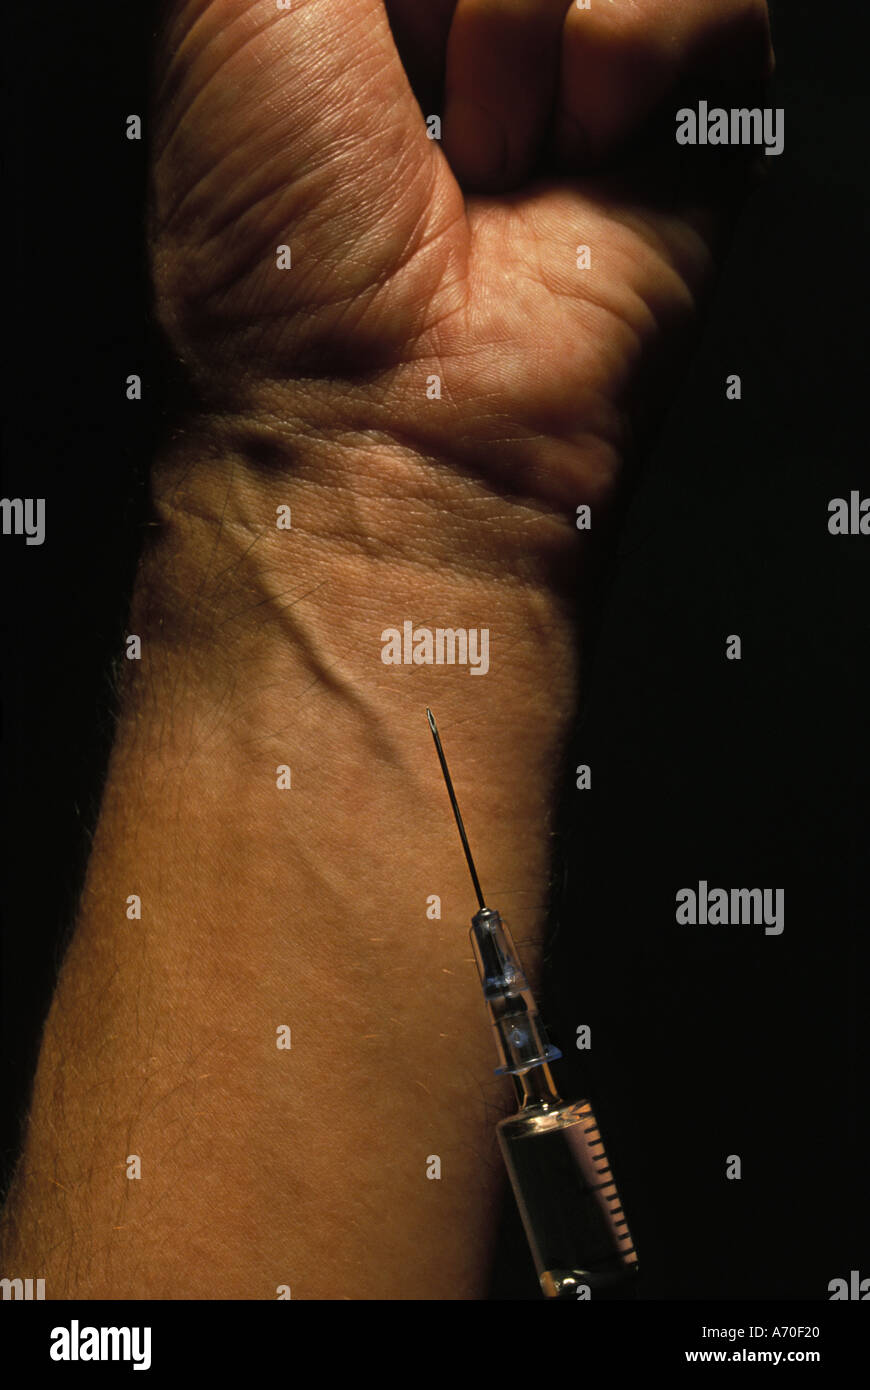 injecting drugs into arm Stock Photo